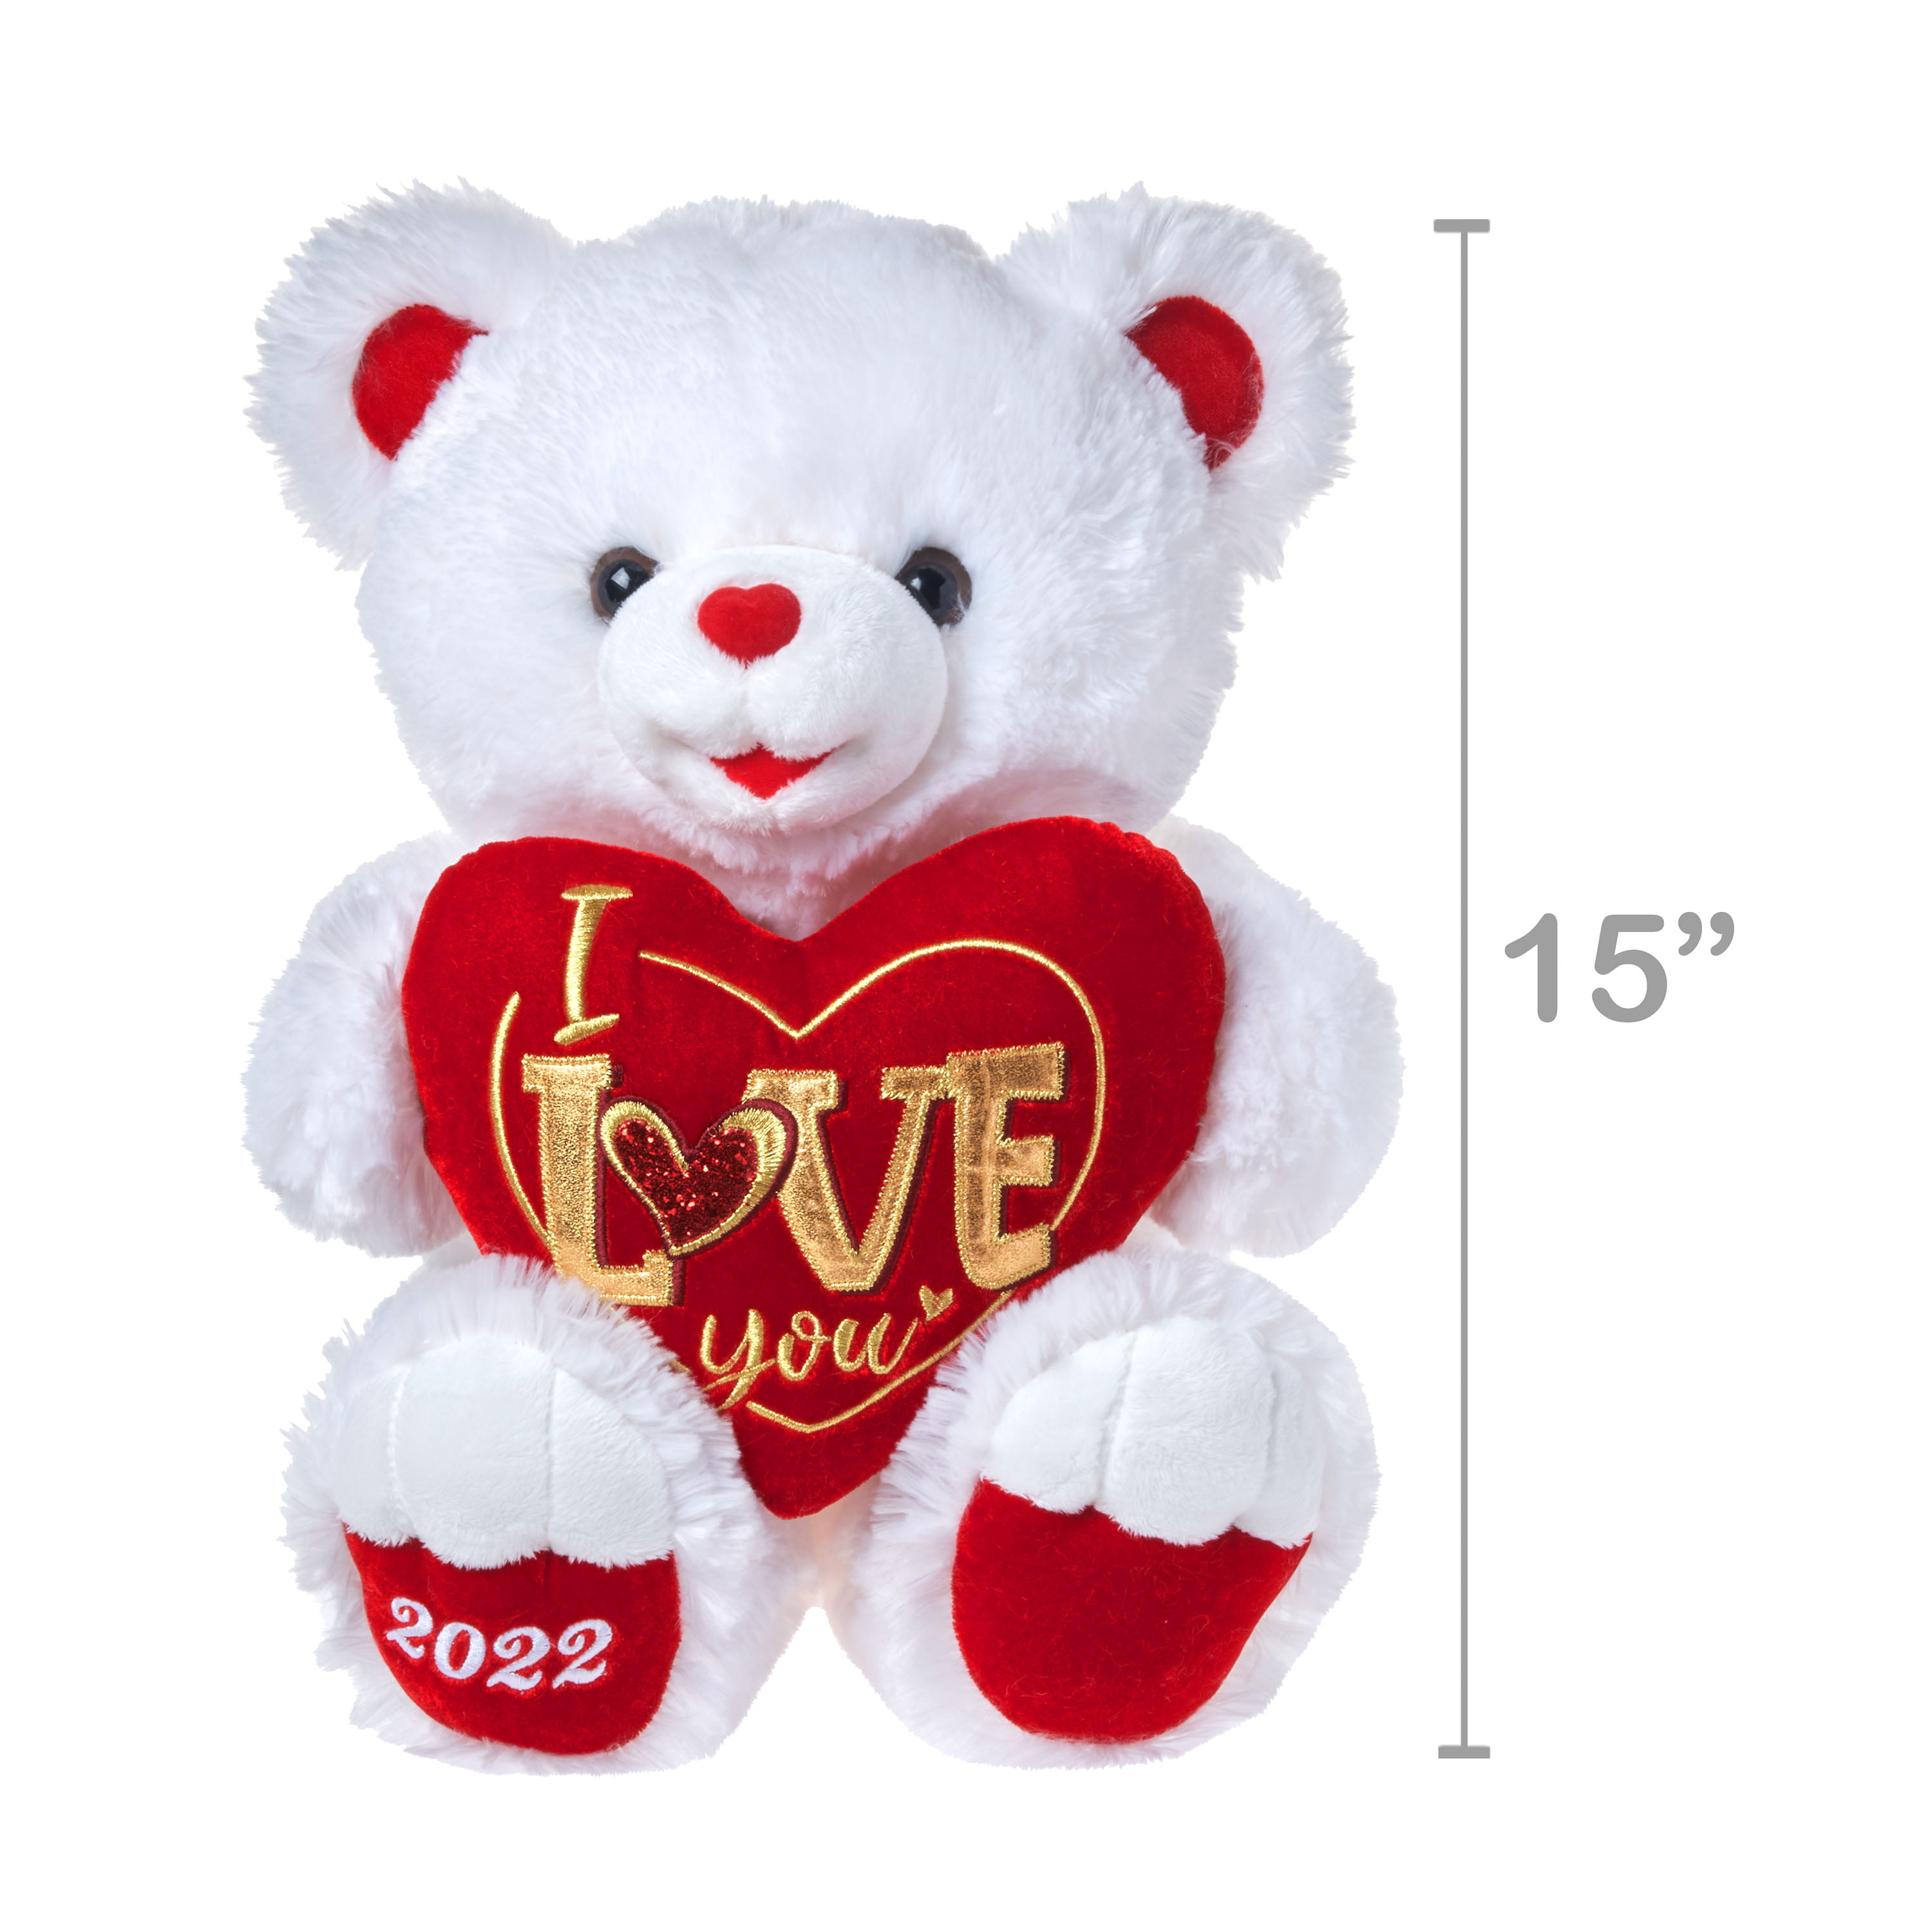 14" White Red Plush Teddy Bear LOVE Heart Embroidered Flowers VALENTINE'S DAYS